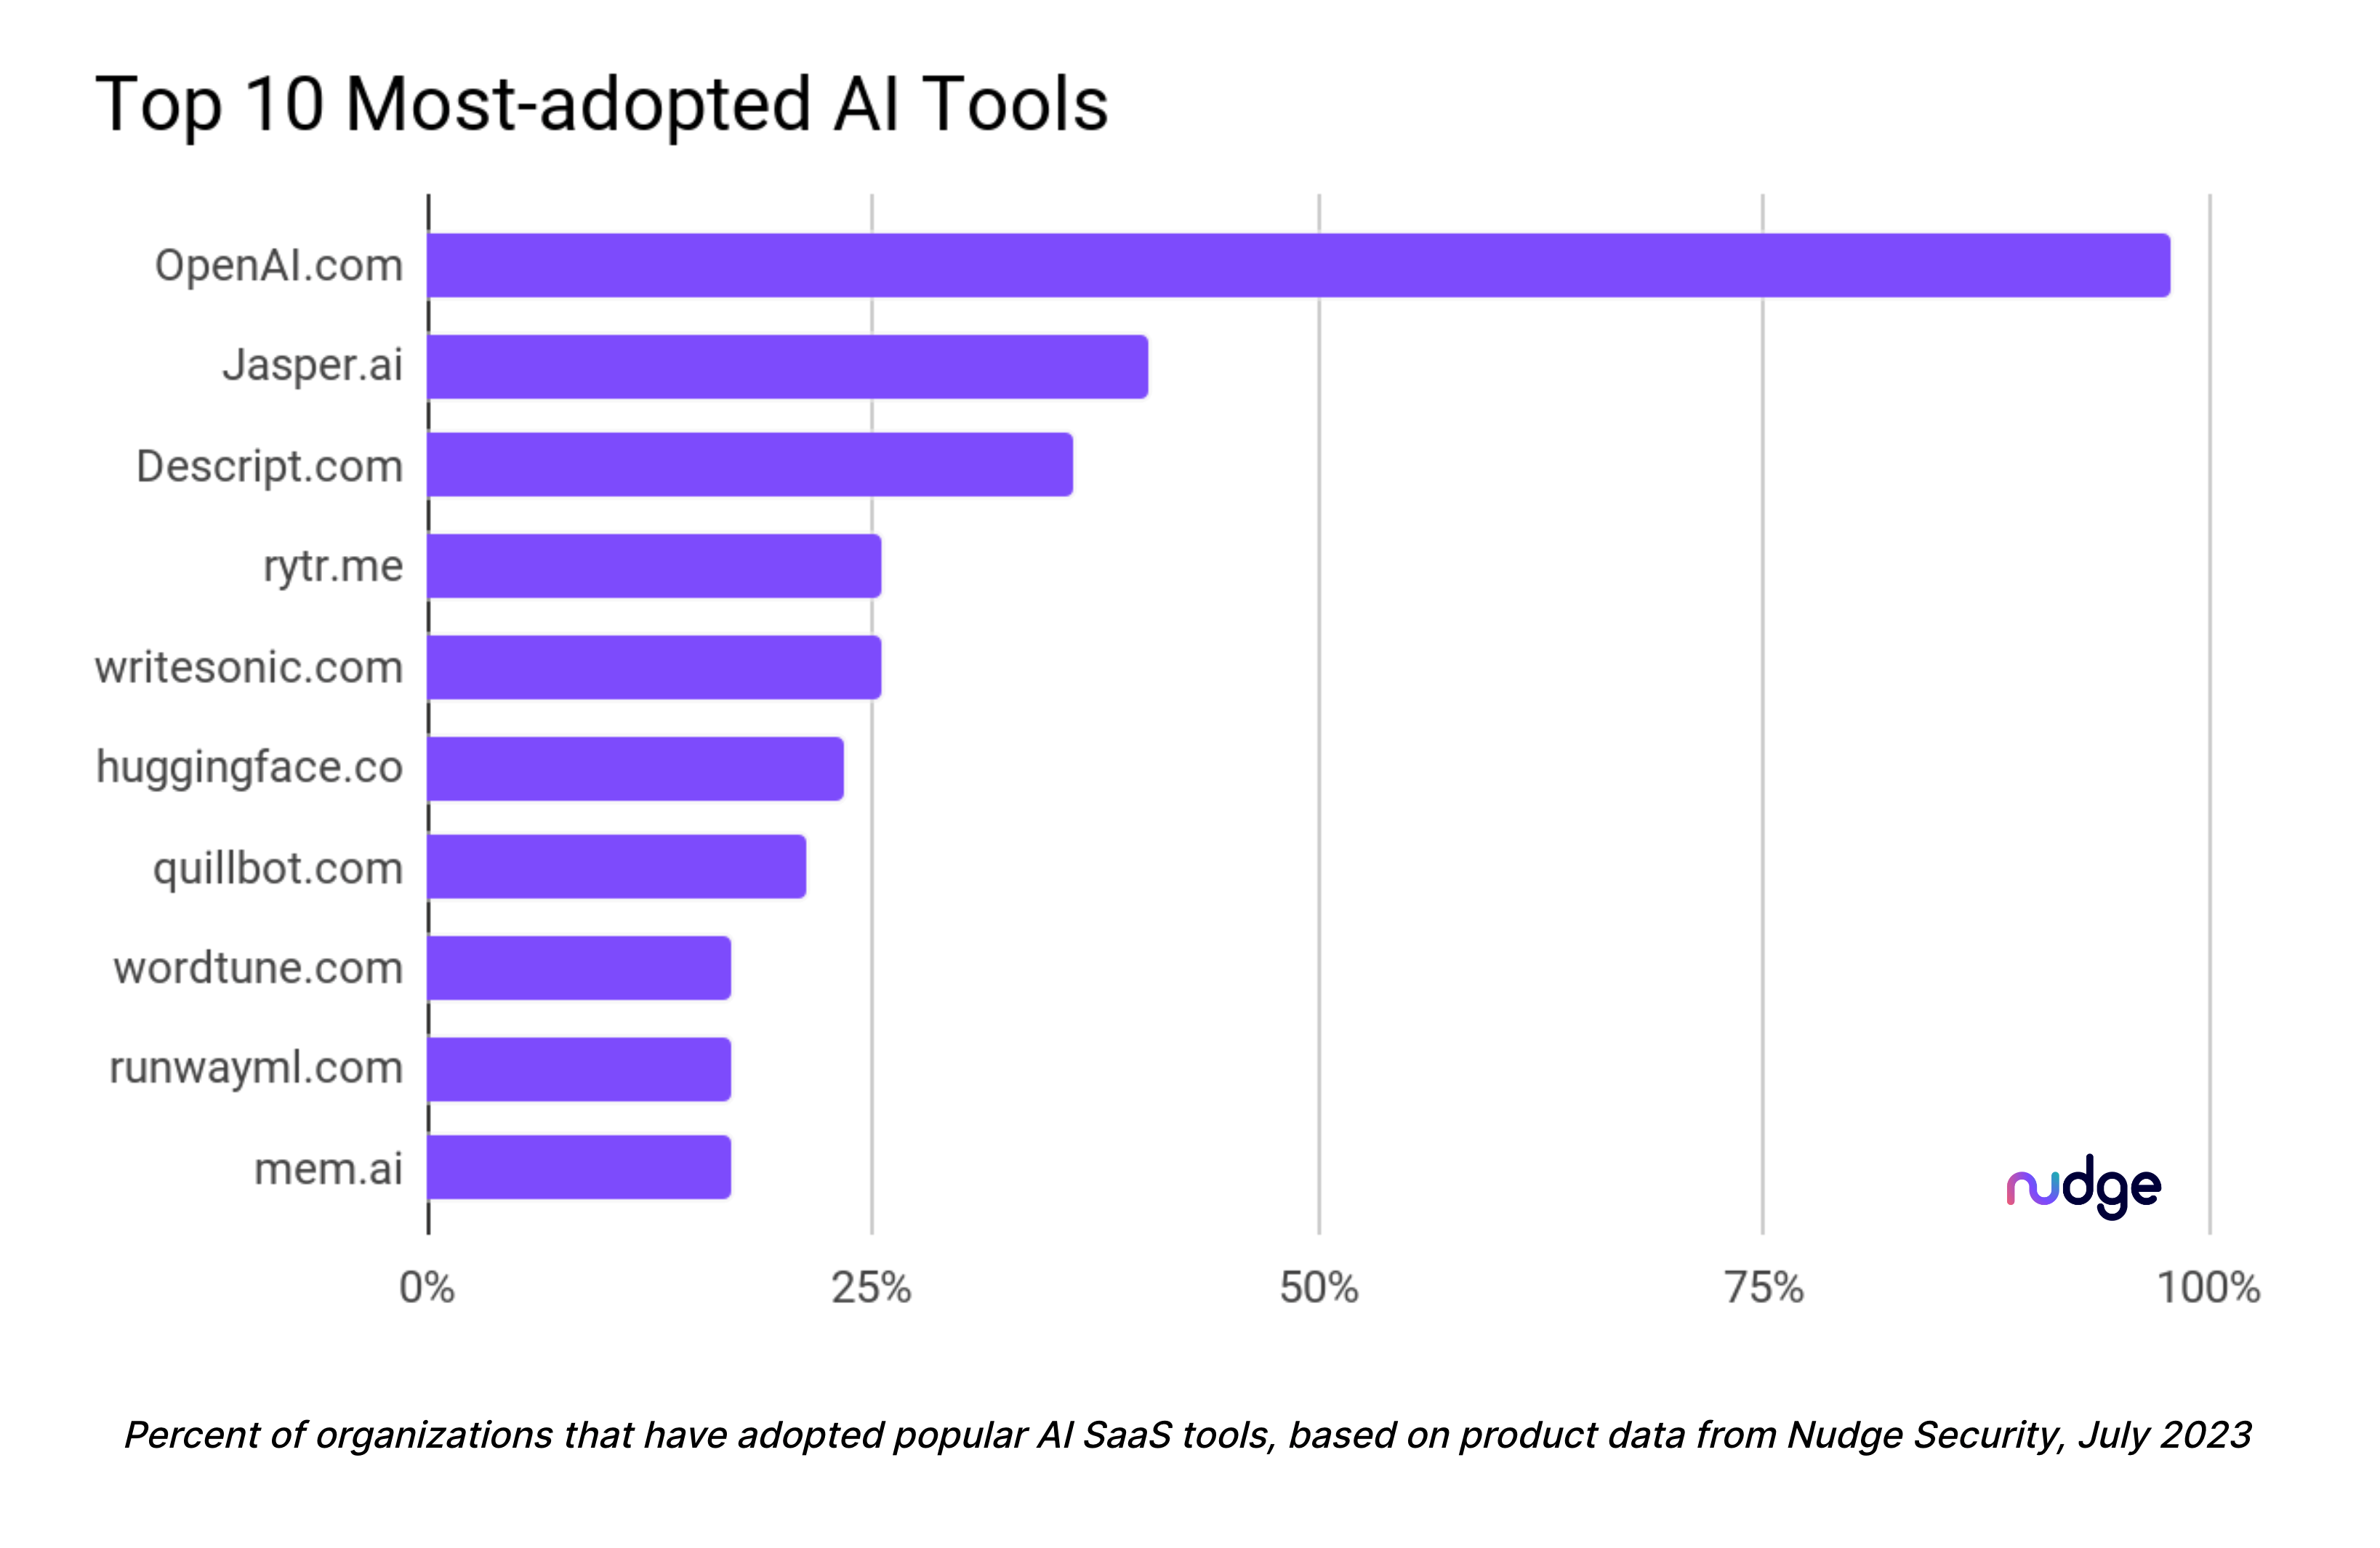 Infosec Doesn't Know What AI Tools Orgs Are Using